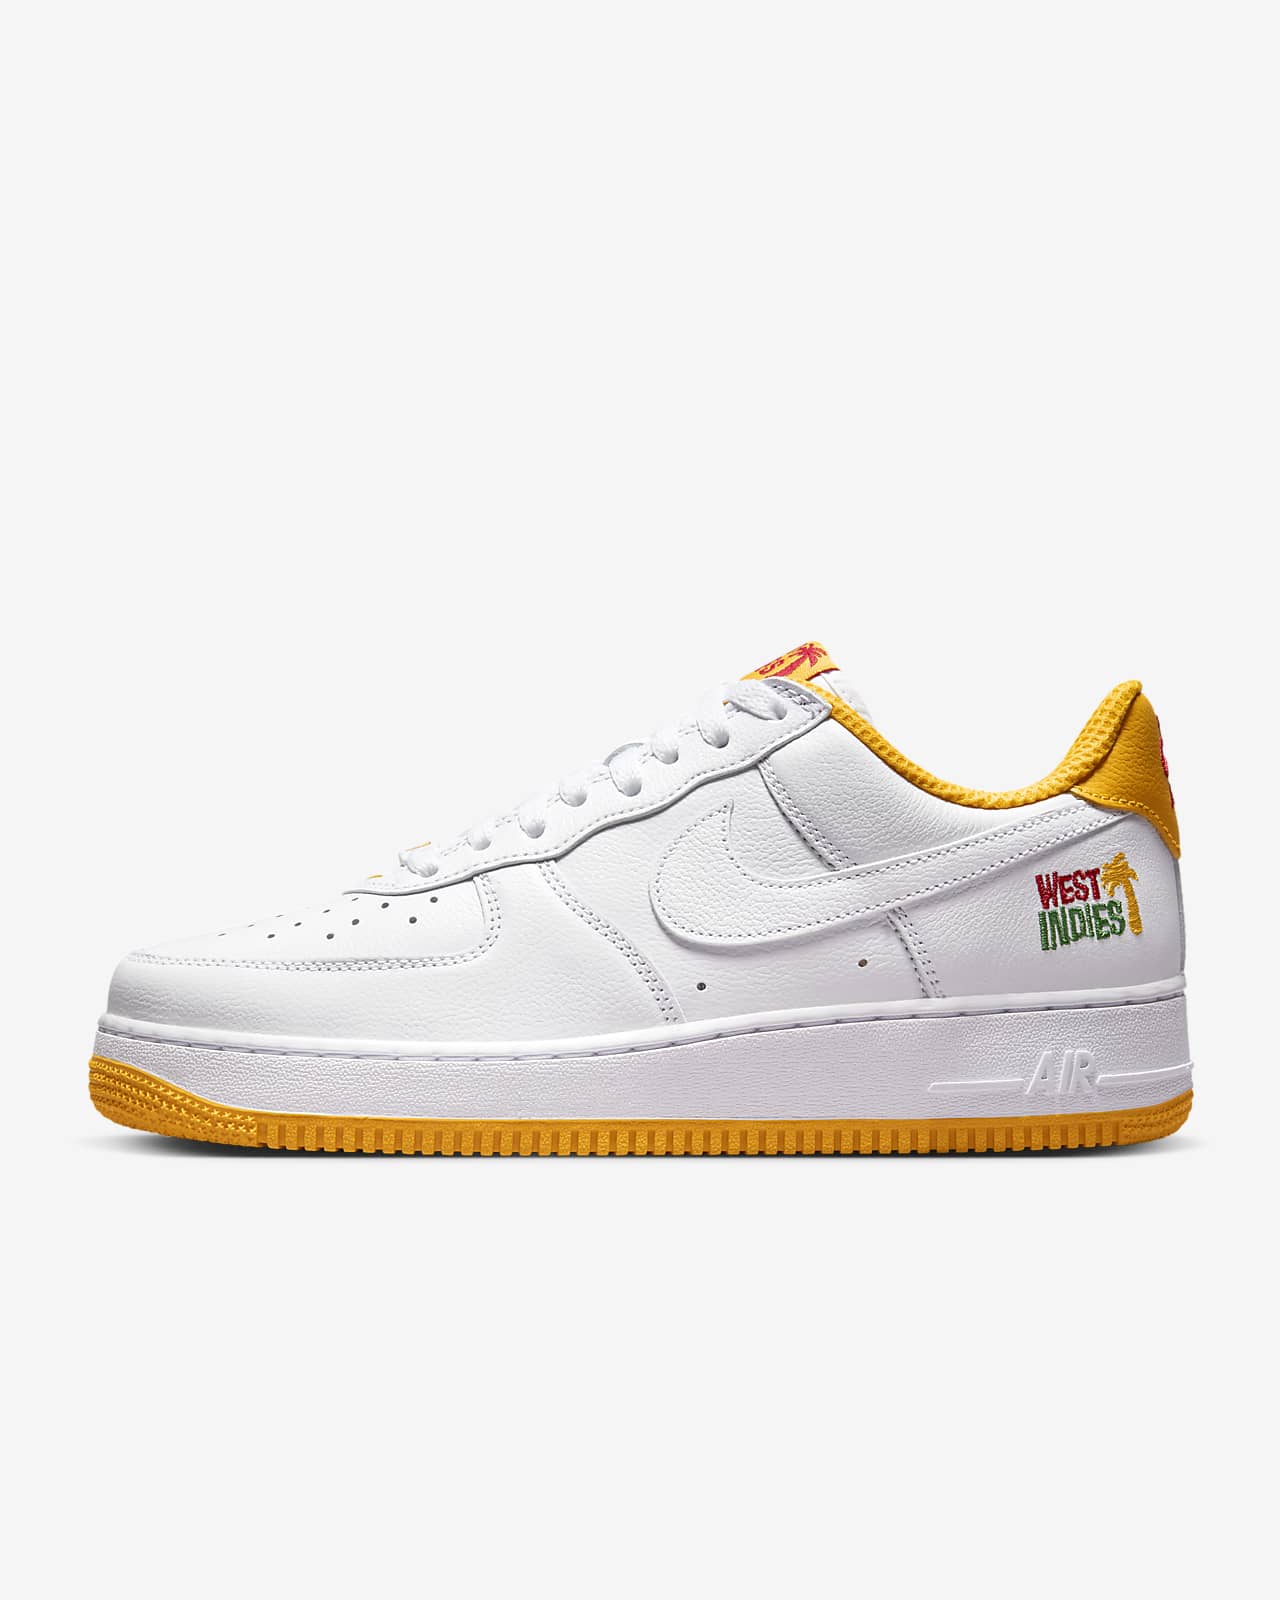 Get Ready For The Nike Air Force 1 '07 LV8 NBA White Red